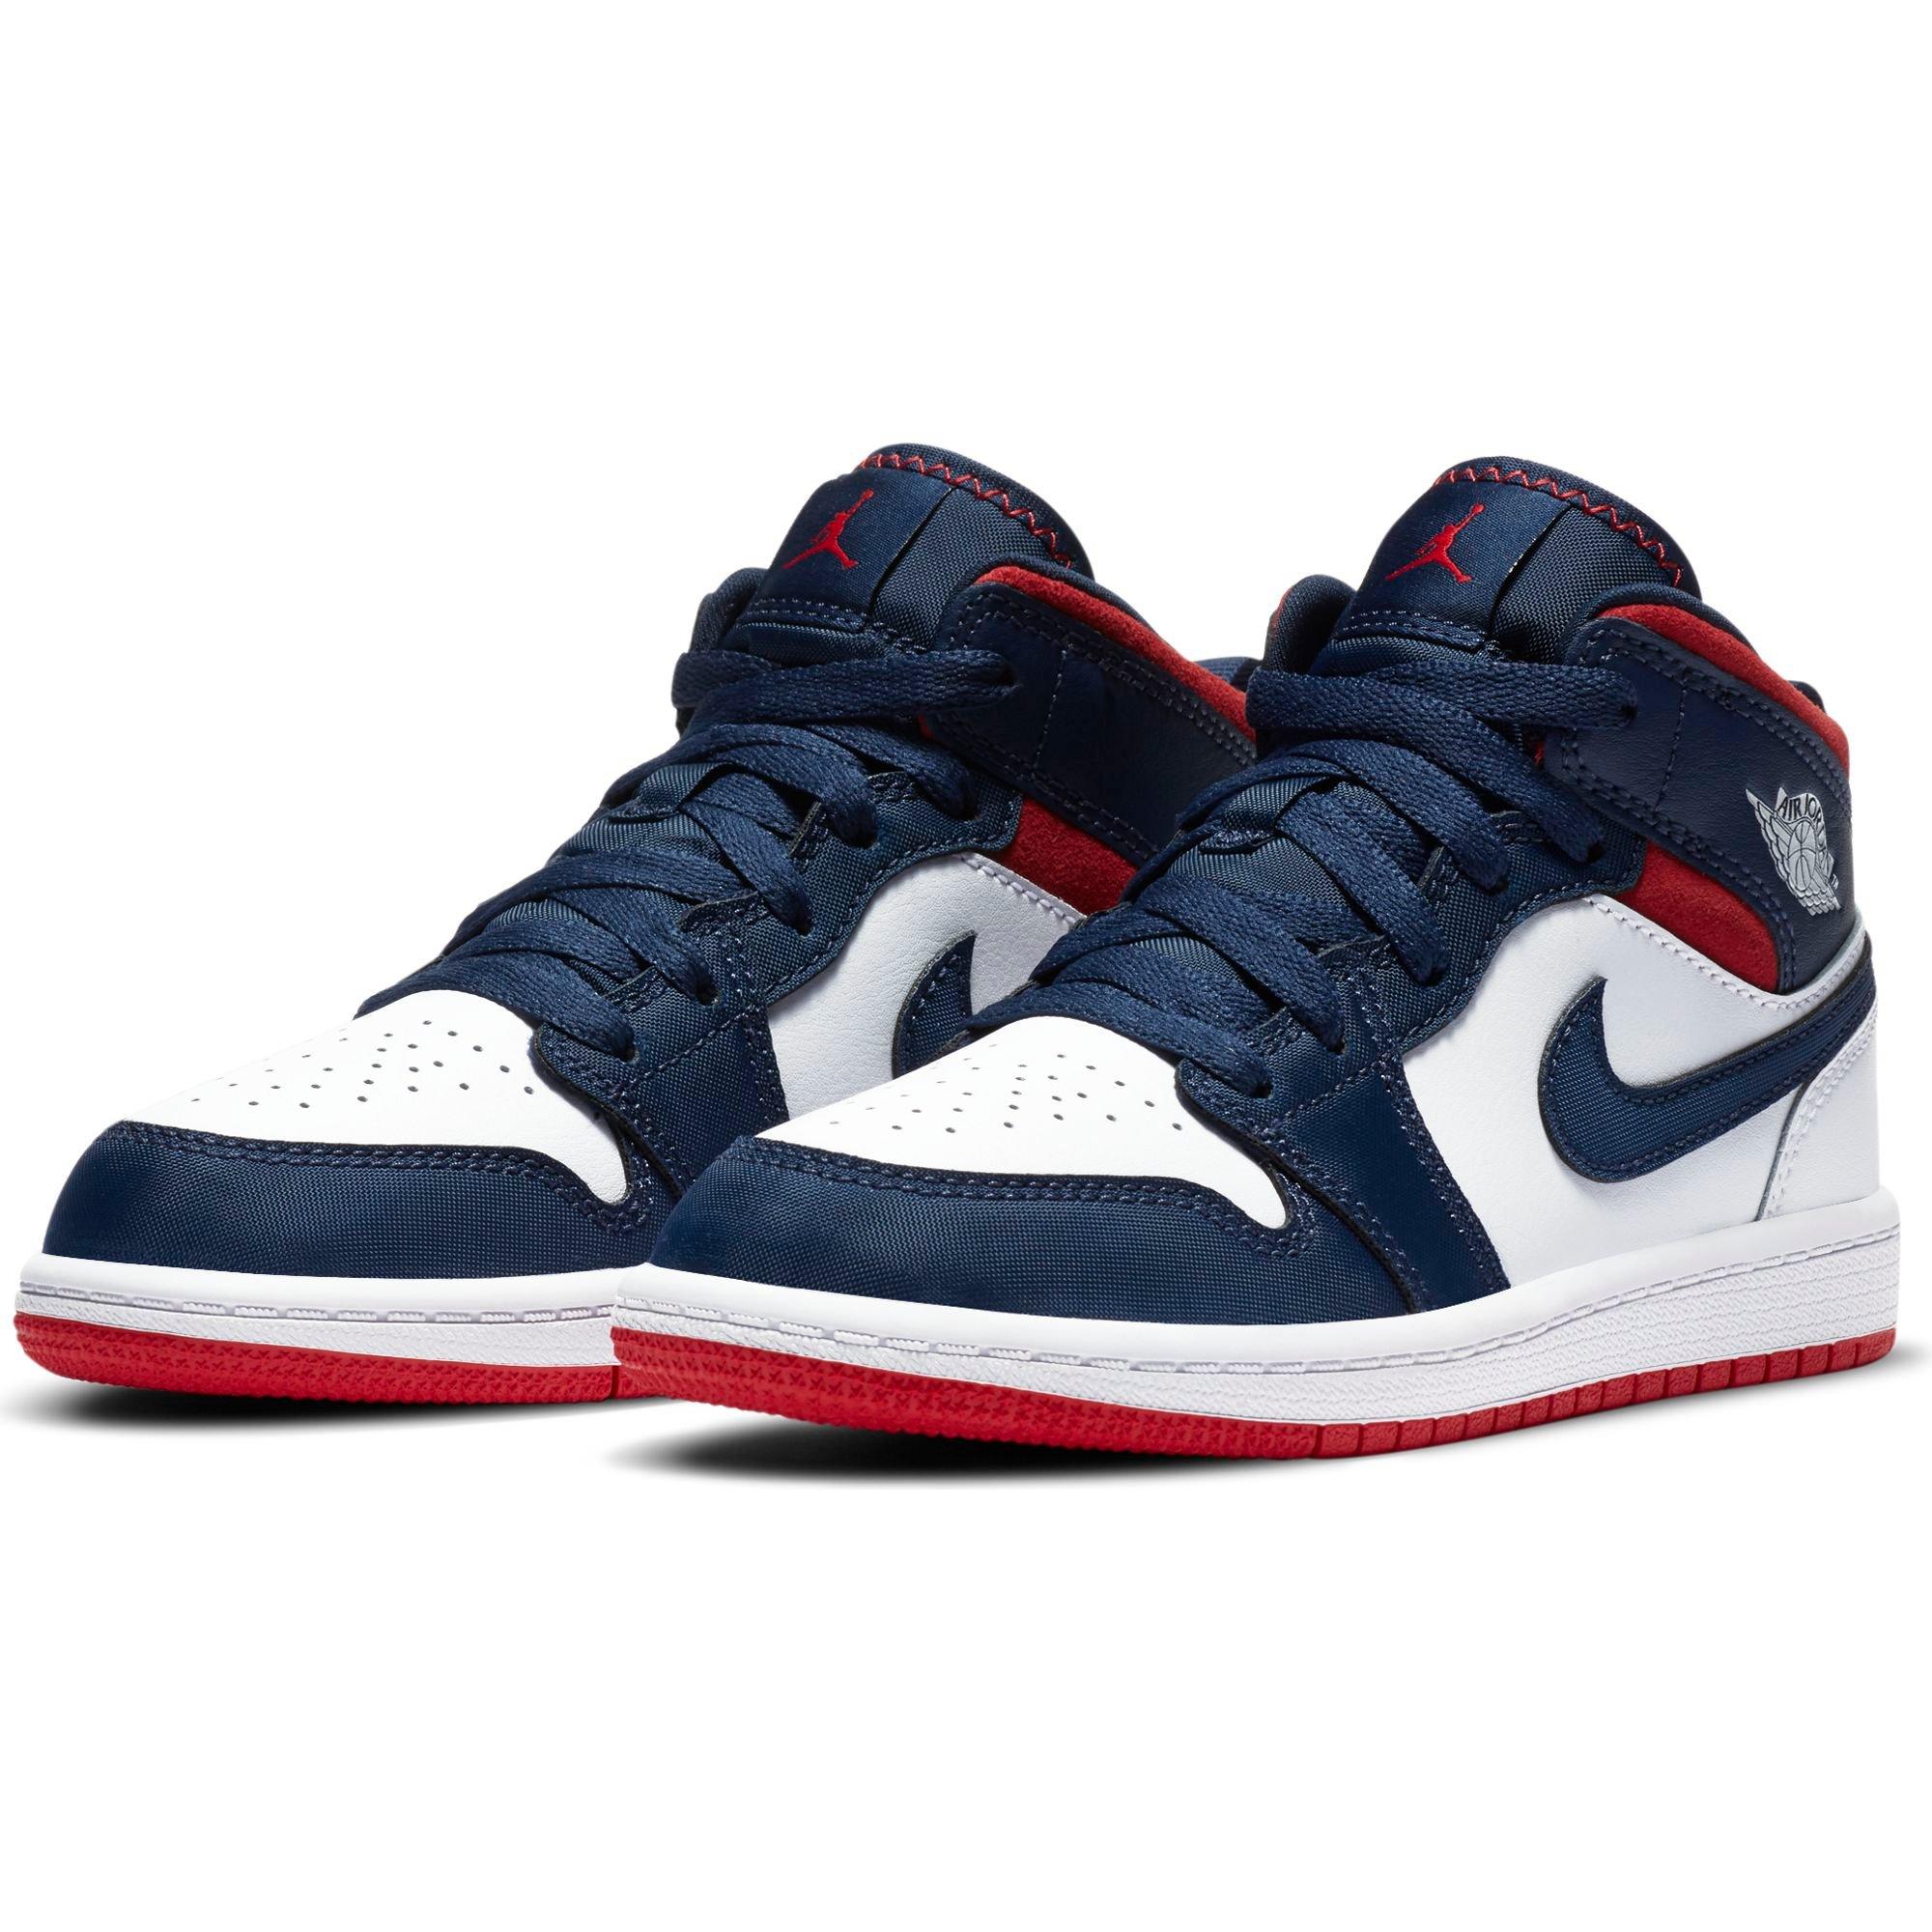 red and navy blue jordan 1